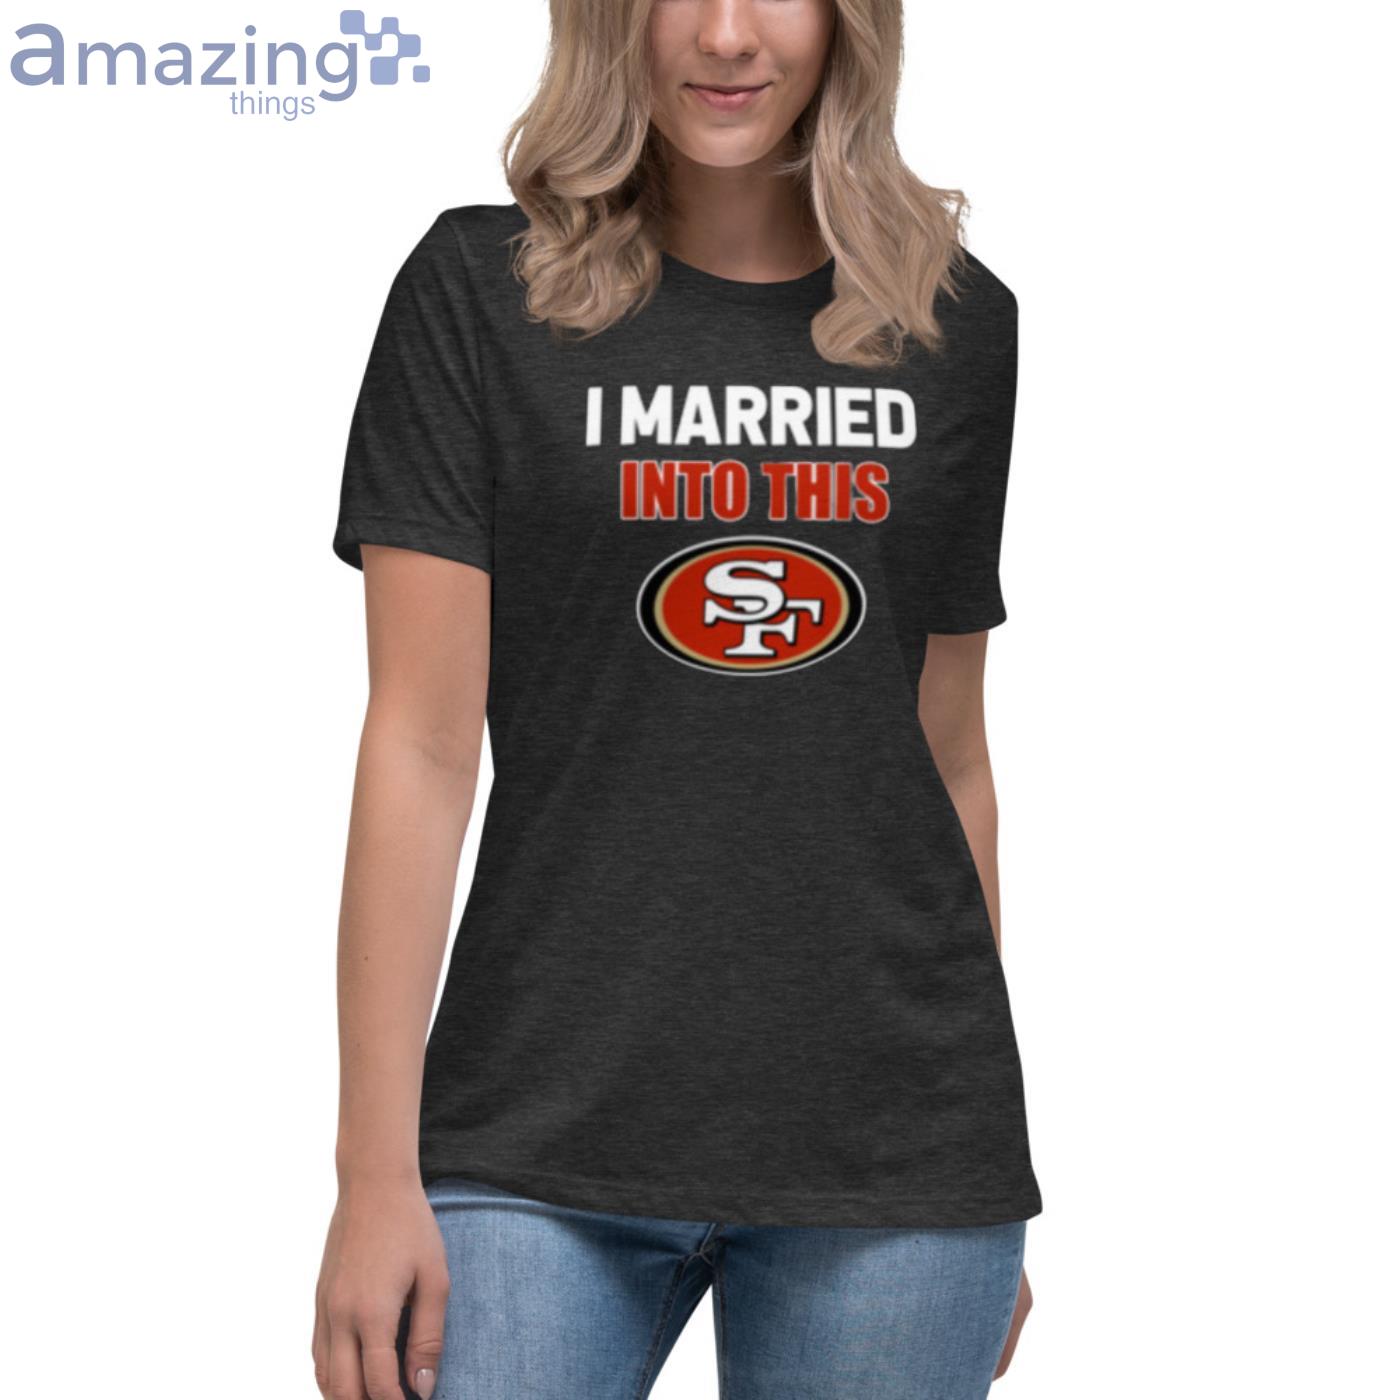 I Married Into This San Francisco 49ers Football NFL T-Shirts